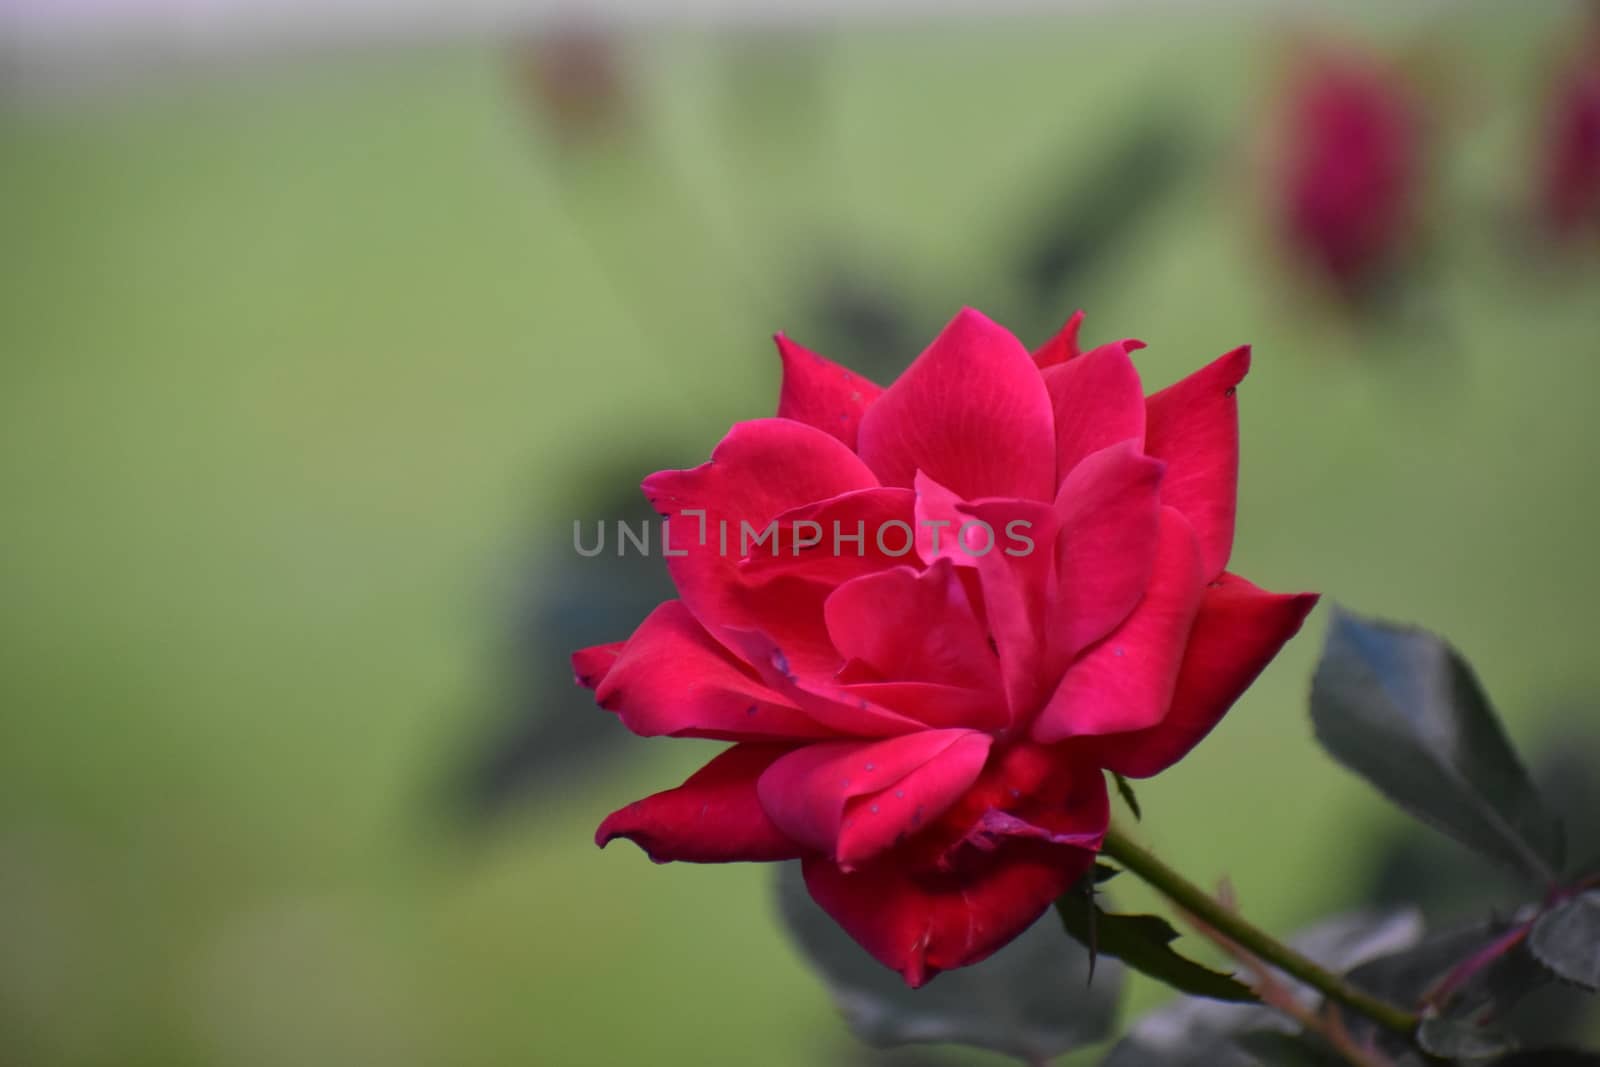 A Close Up Shot of a Red Rose by bju12290